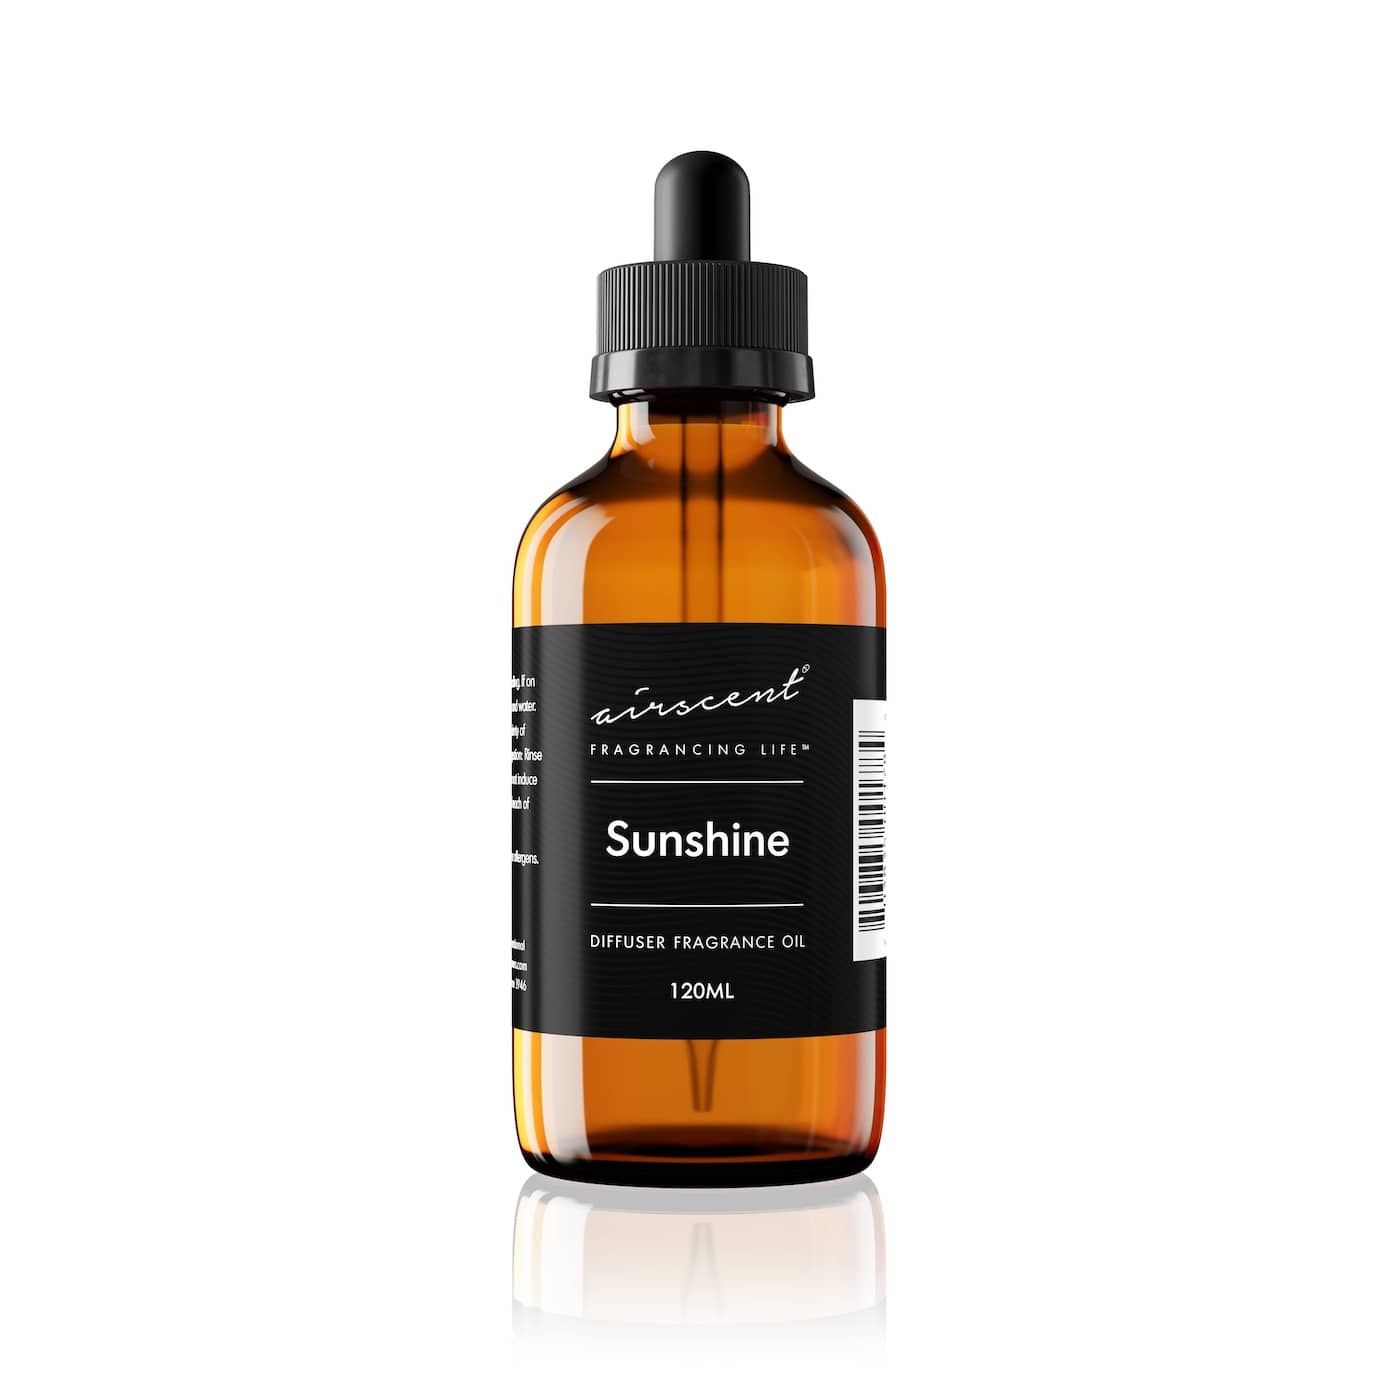 Sunshine diffuser oil citrusy explosion of grapefruit and other fruity notes